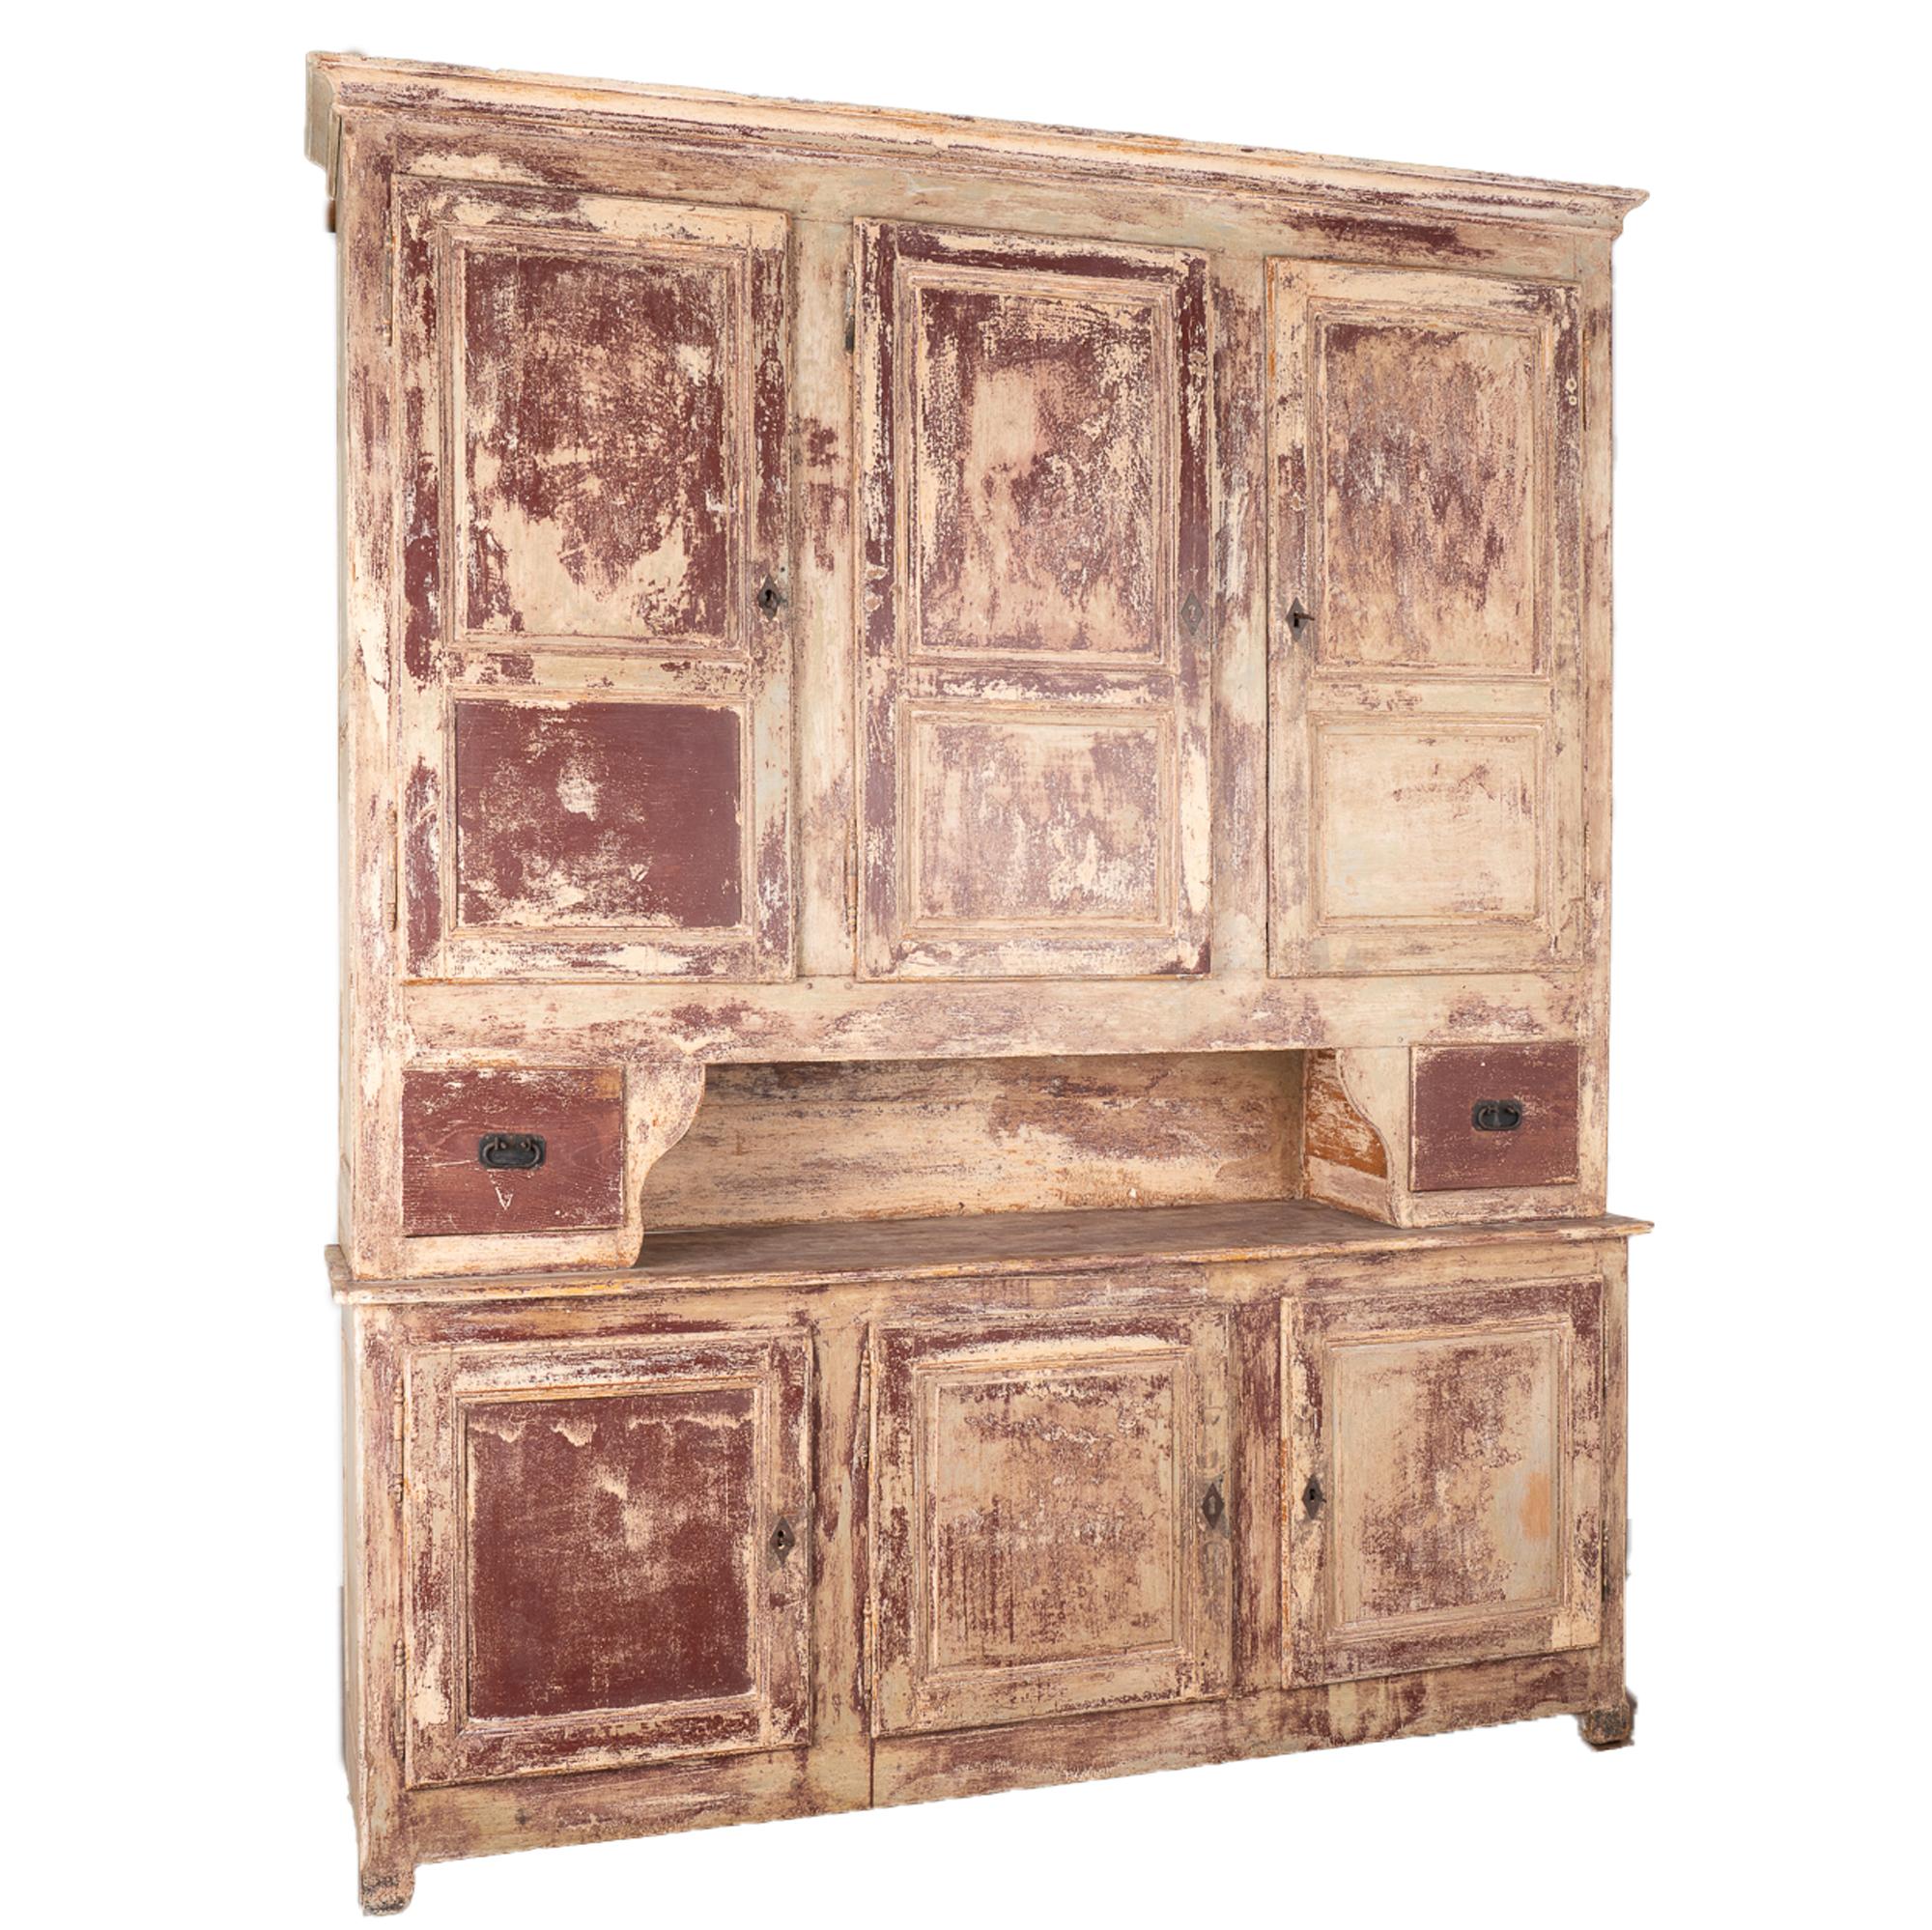 This amazing French country pine shop cabinet is from the late 1800's and stands 9.5' tall.
Newer custom painted layered finish in burgundy with a white interior, distressed fitting the age of this impressive cabinet.
The unique configuration of